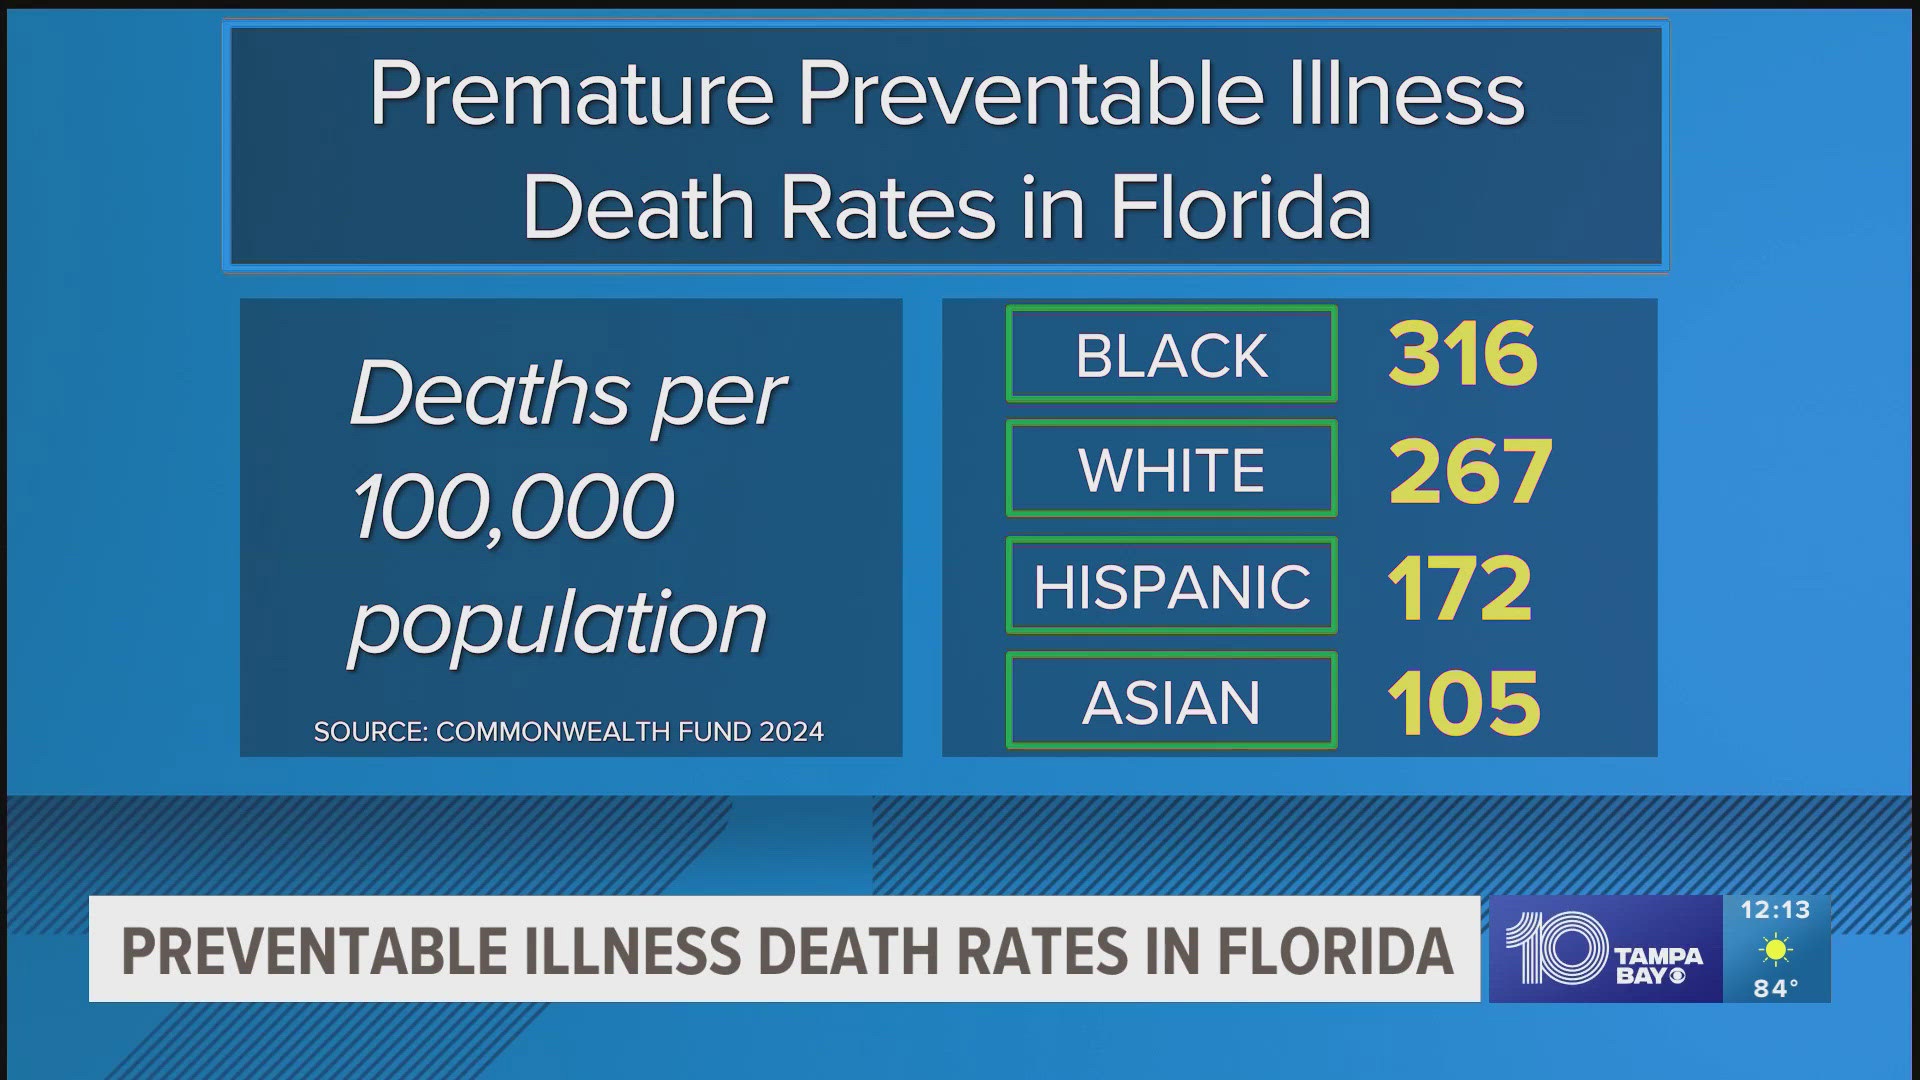 A new report found Black Floridians are more likely to die early from preventable illnesses compared to other racial groups.